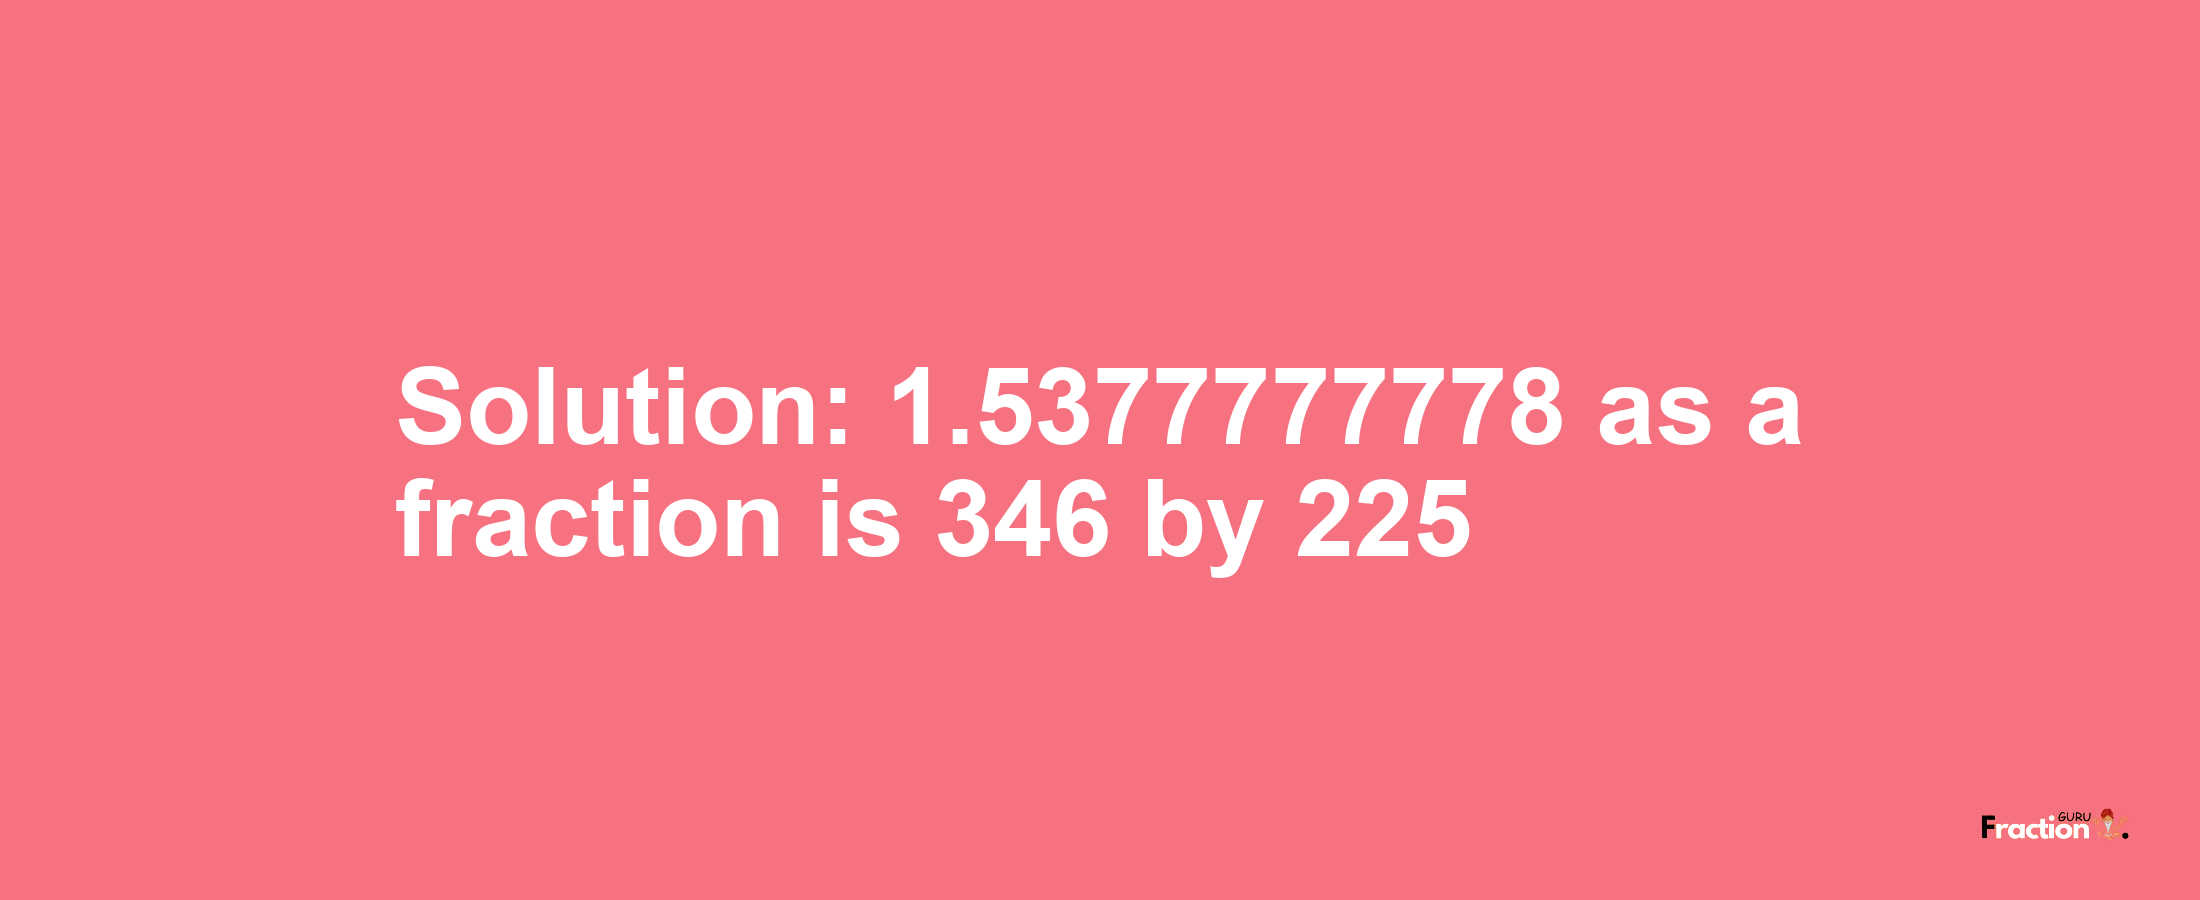 Solution:1.5377777778 as a fraction is 346/225